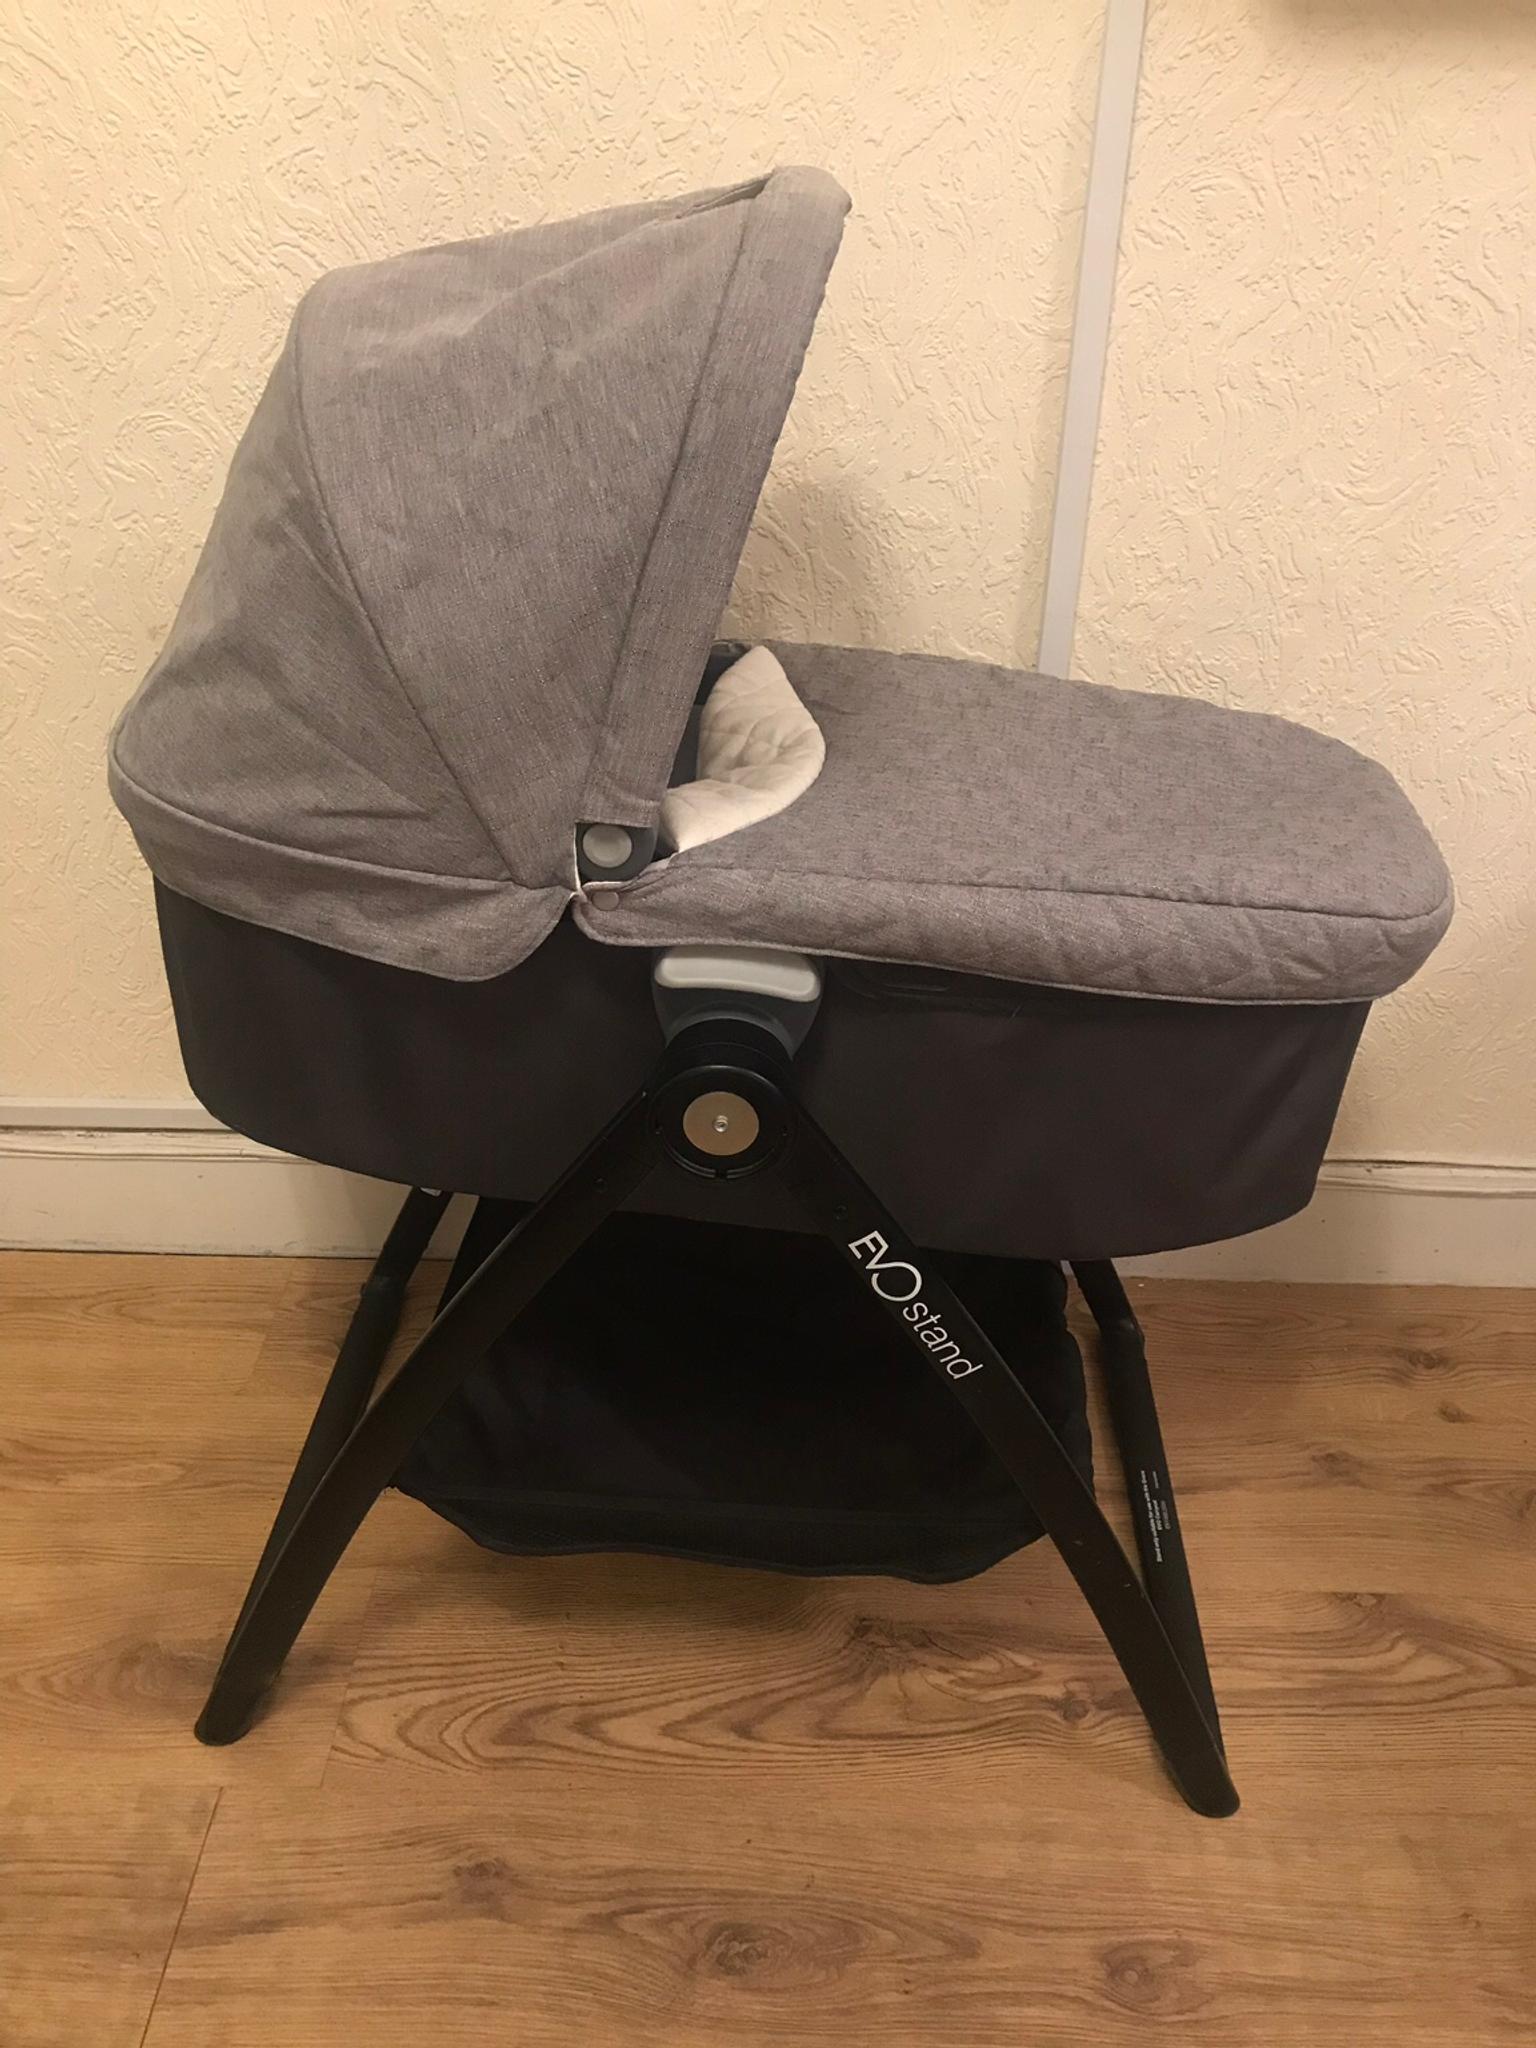 graco evo carrycot stand